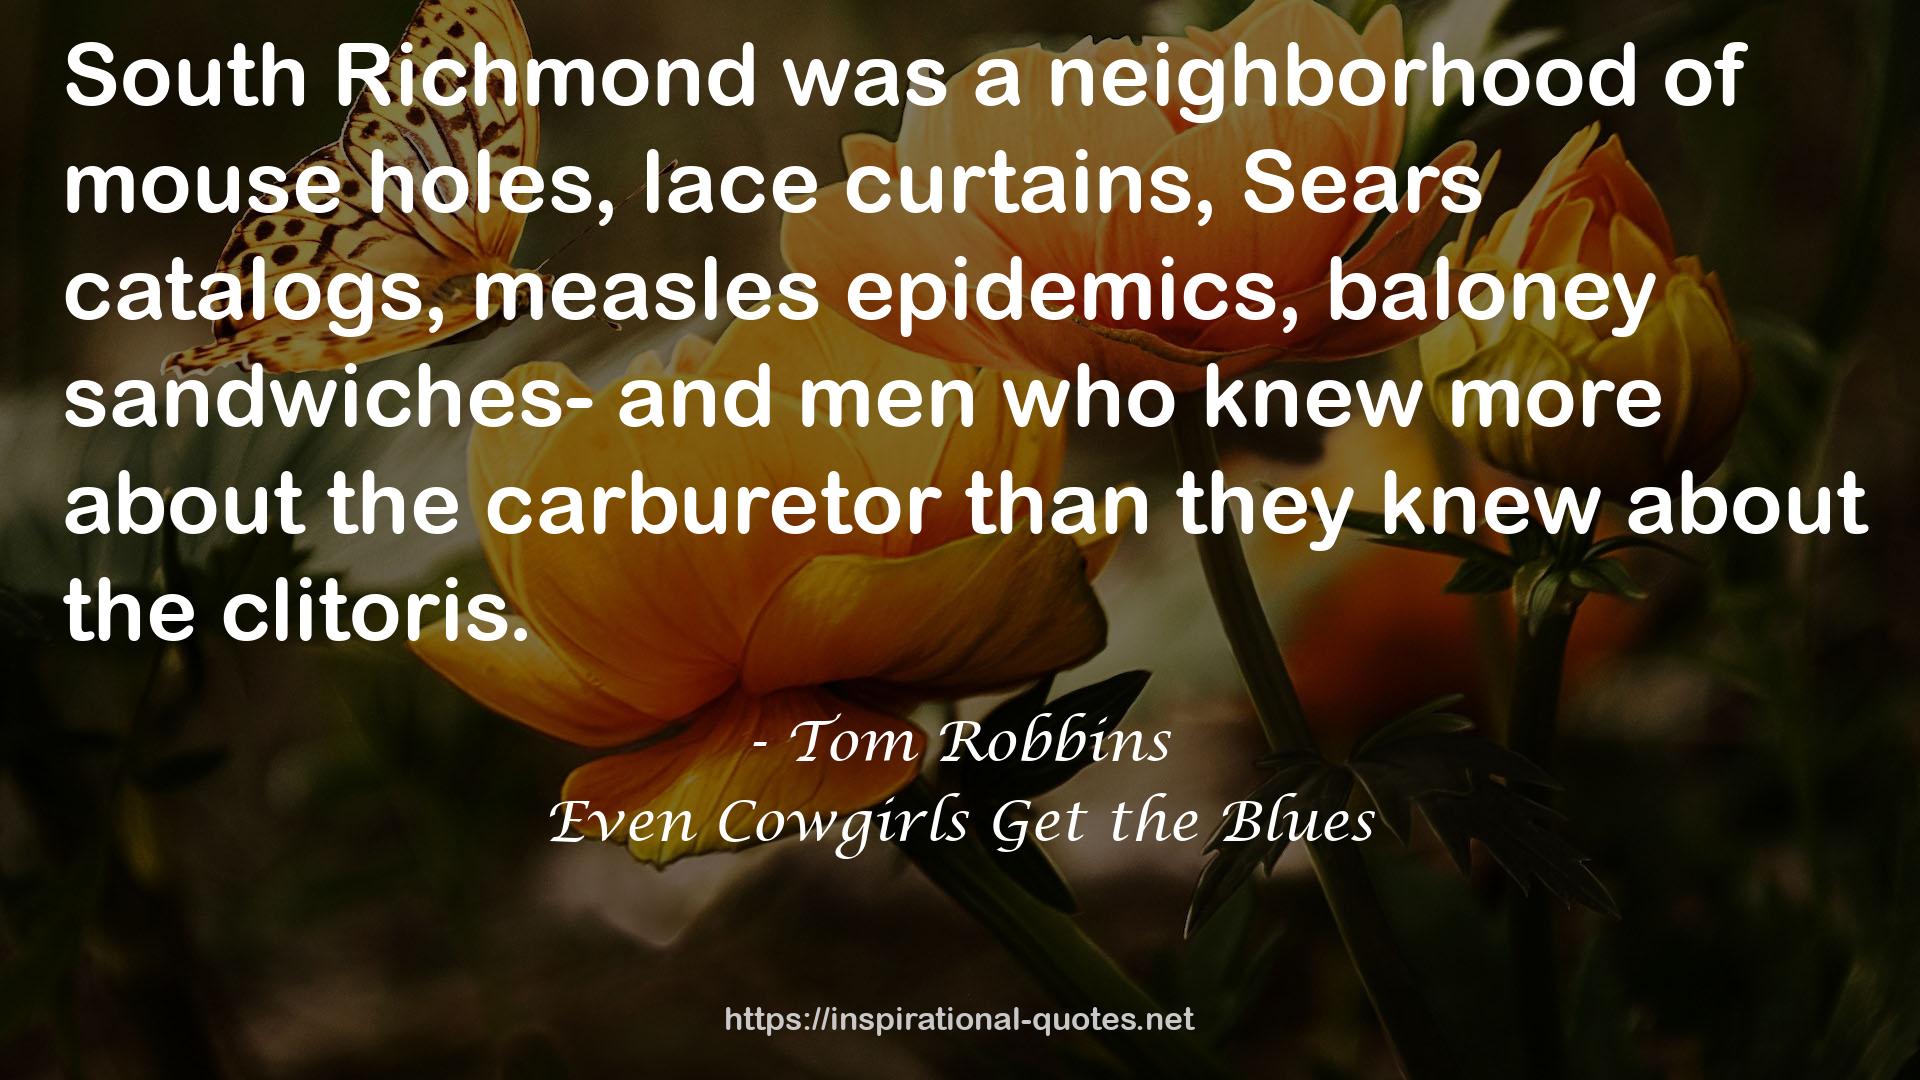 Even Cowgirls Get the Blues QUOTES